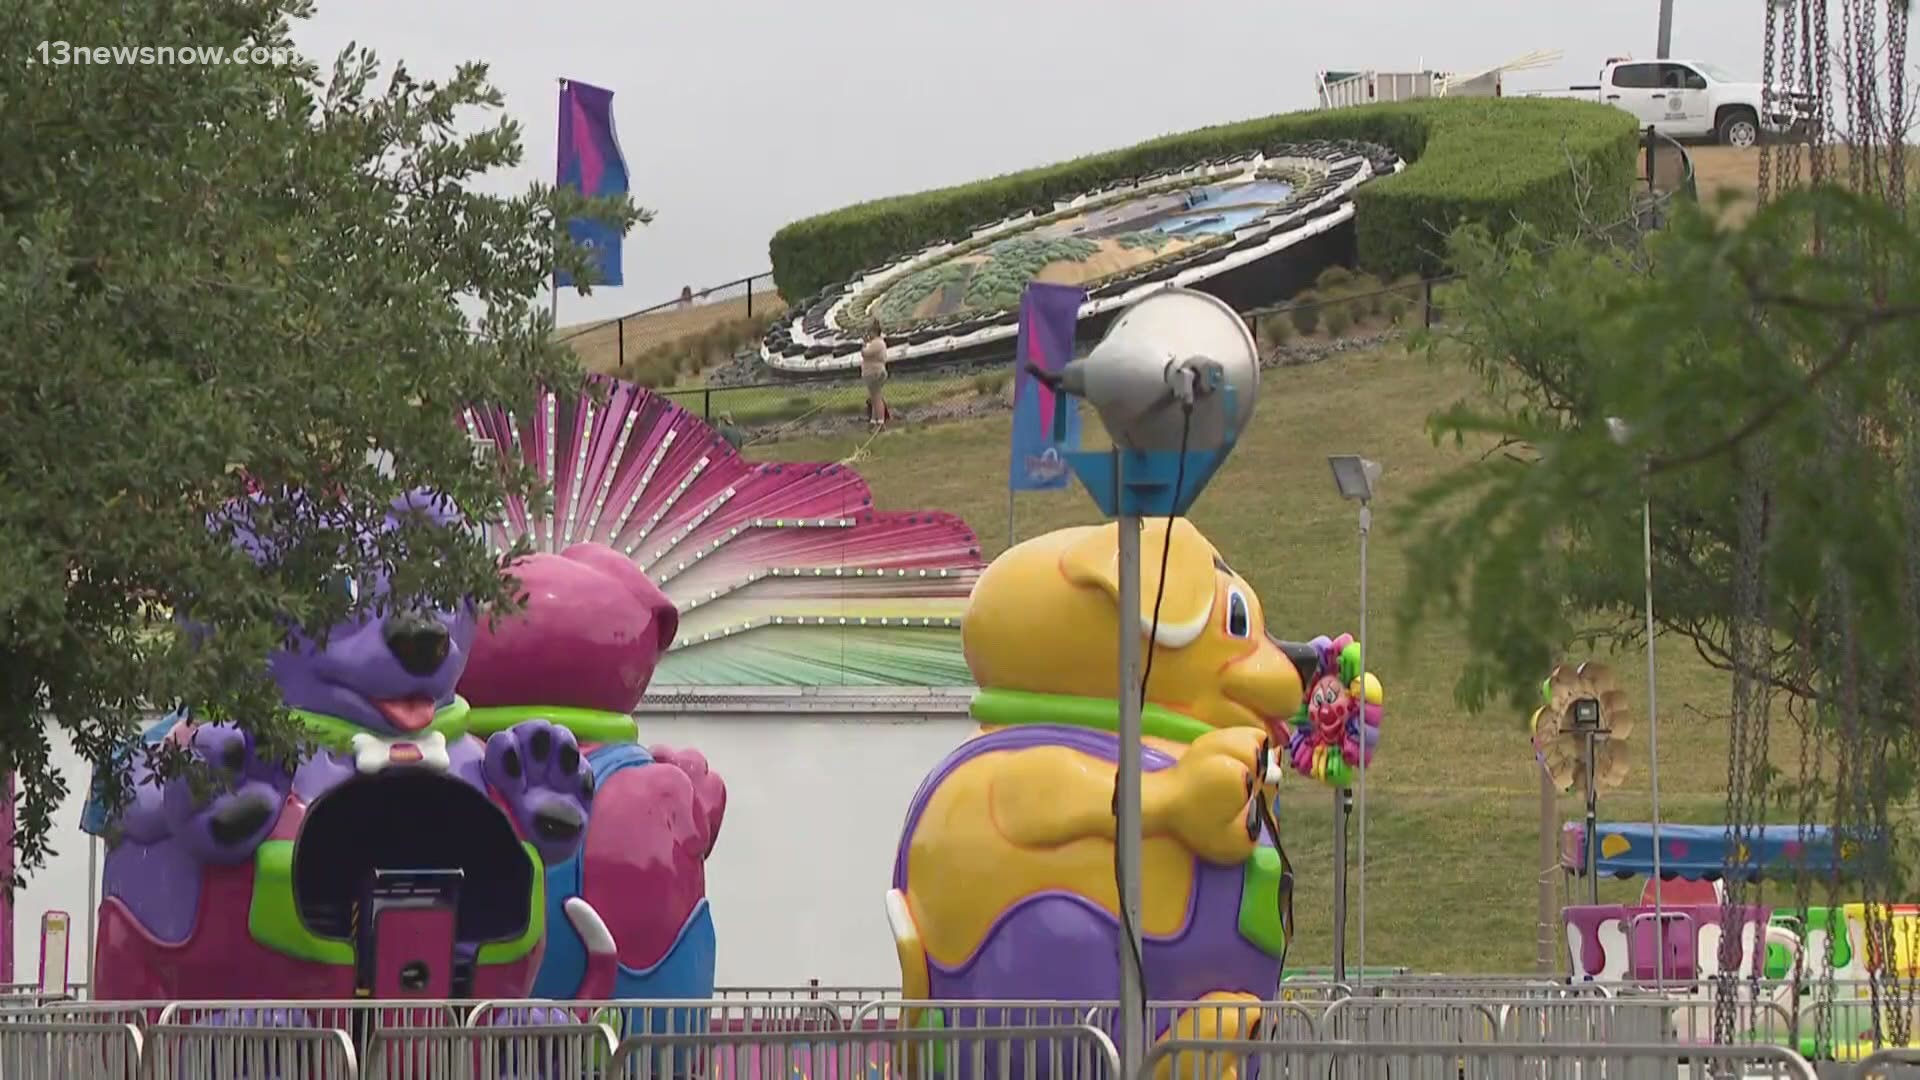 Summer Carnival is back at Mt. Trashmore